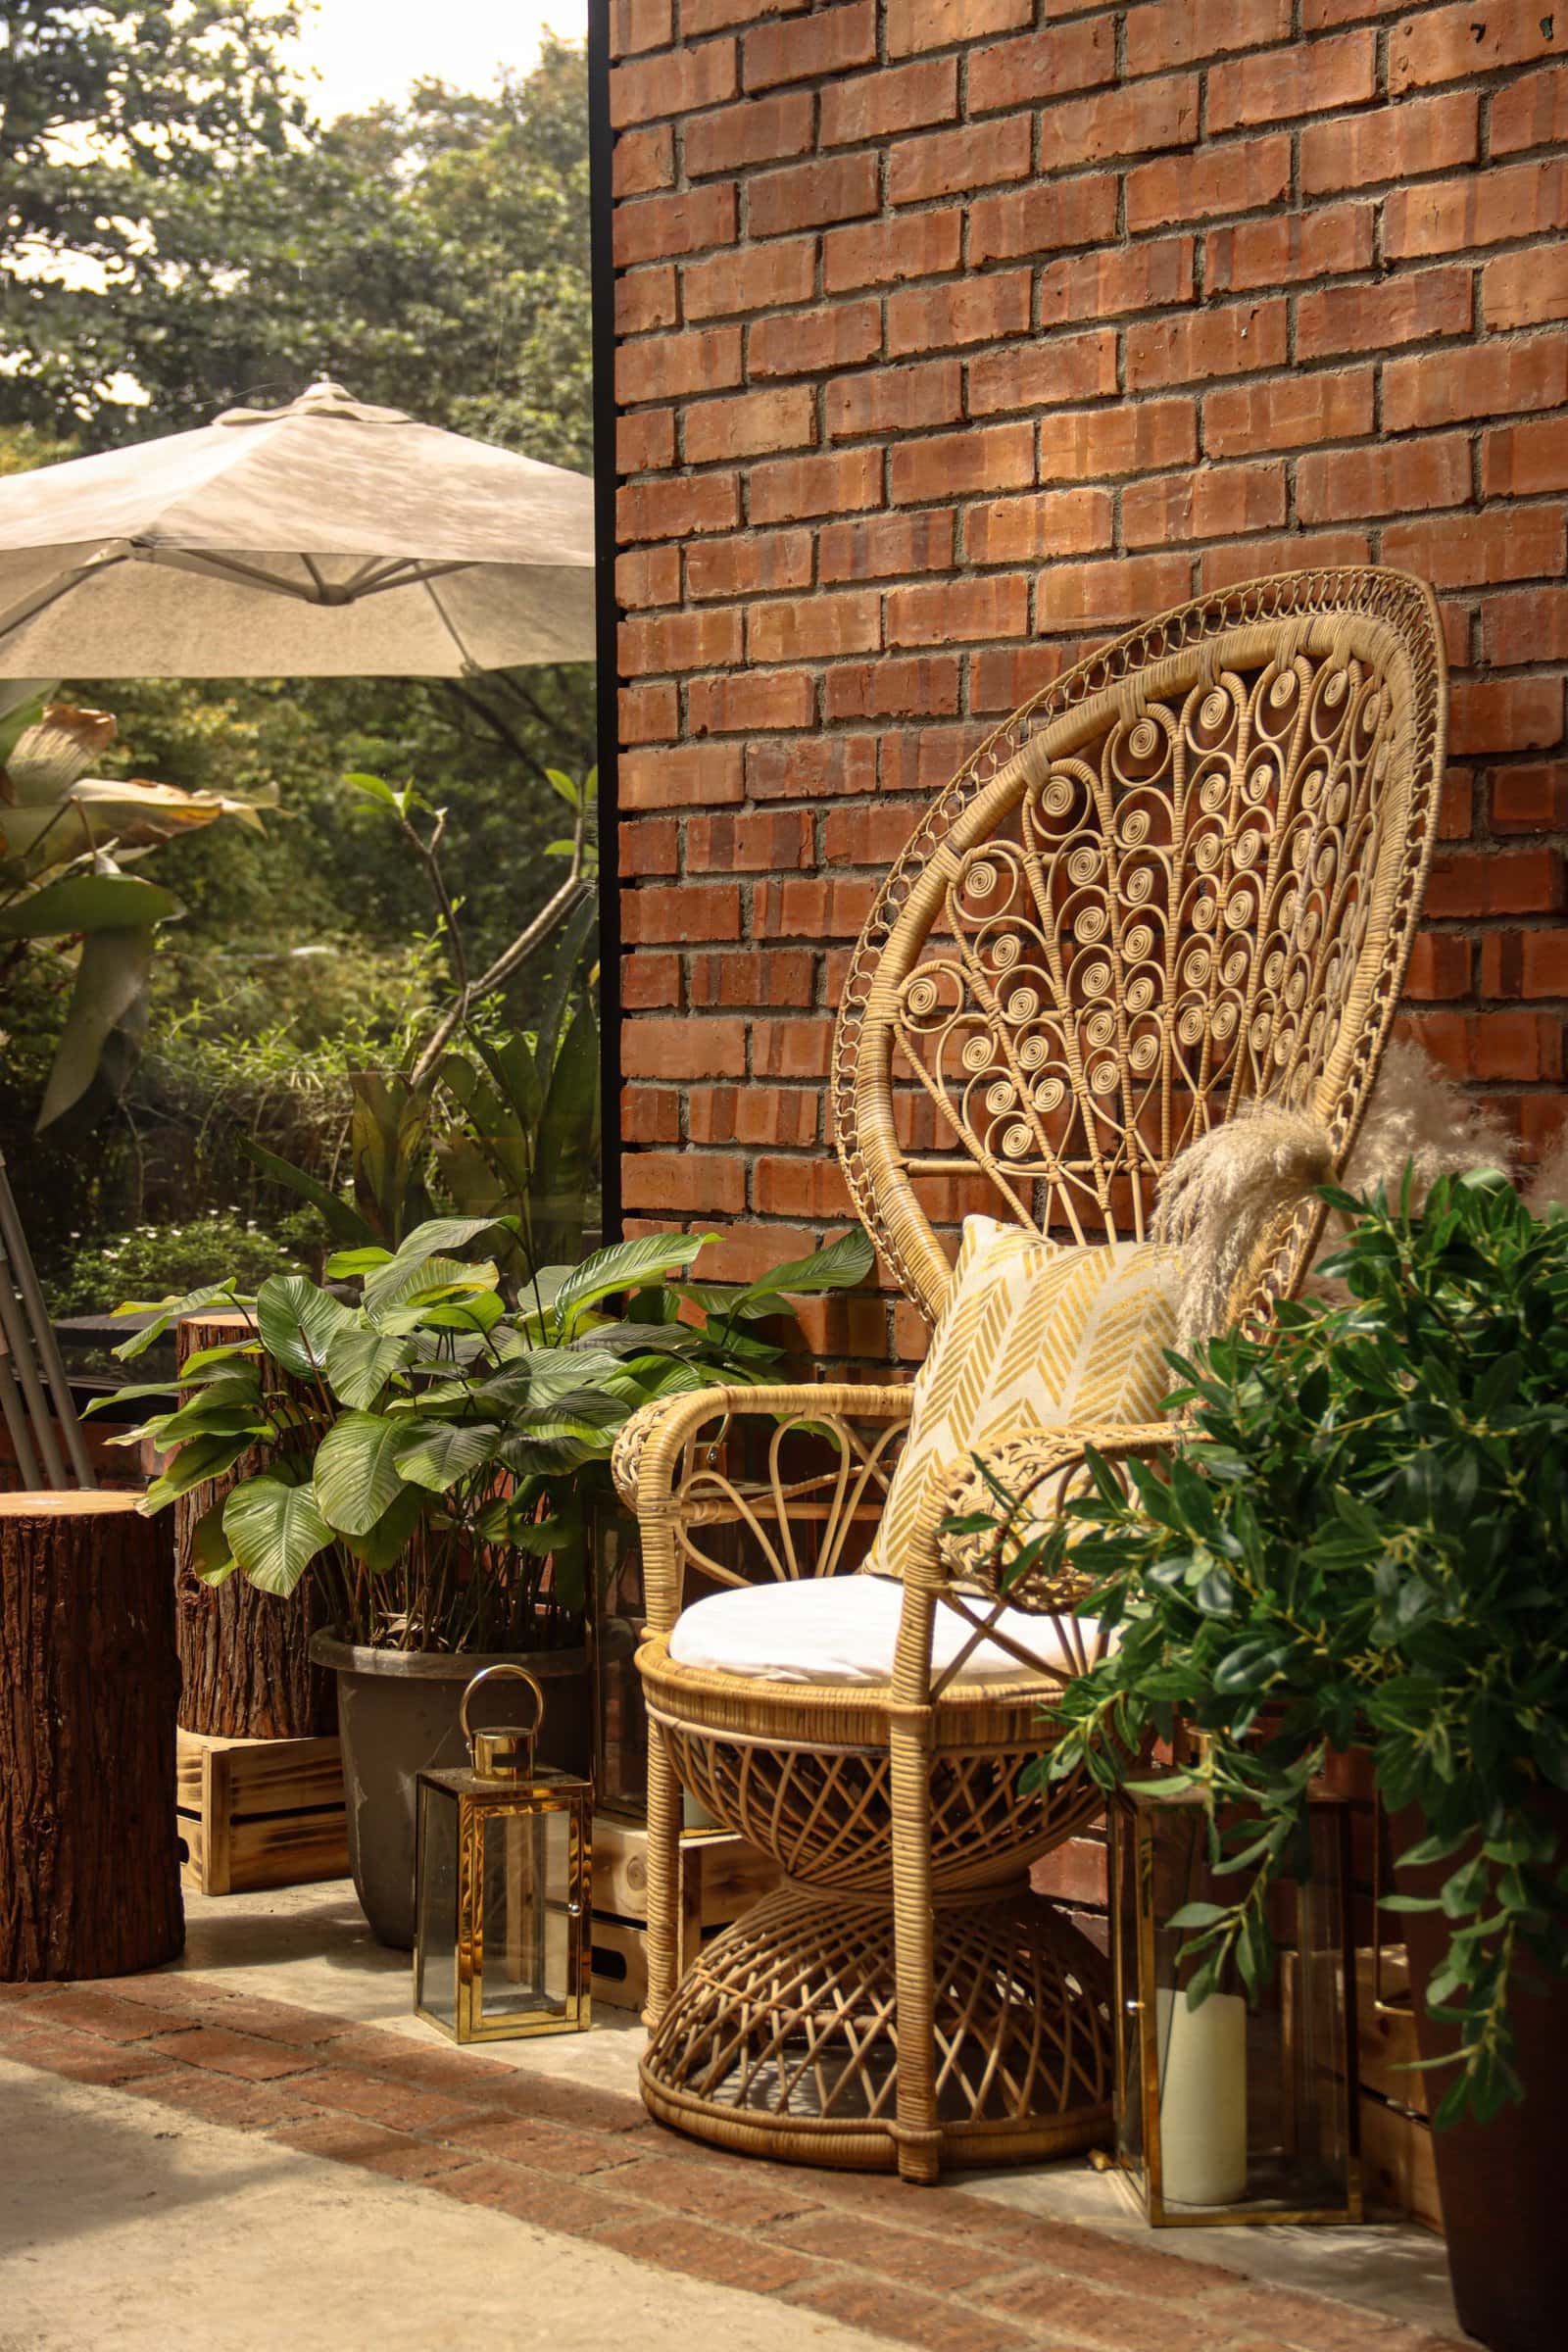  Beautiful Wicker Chair scaled